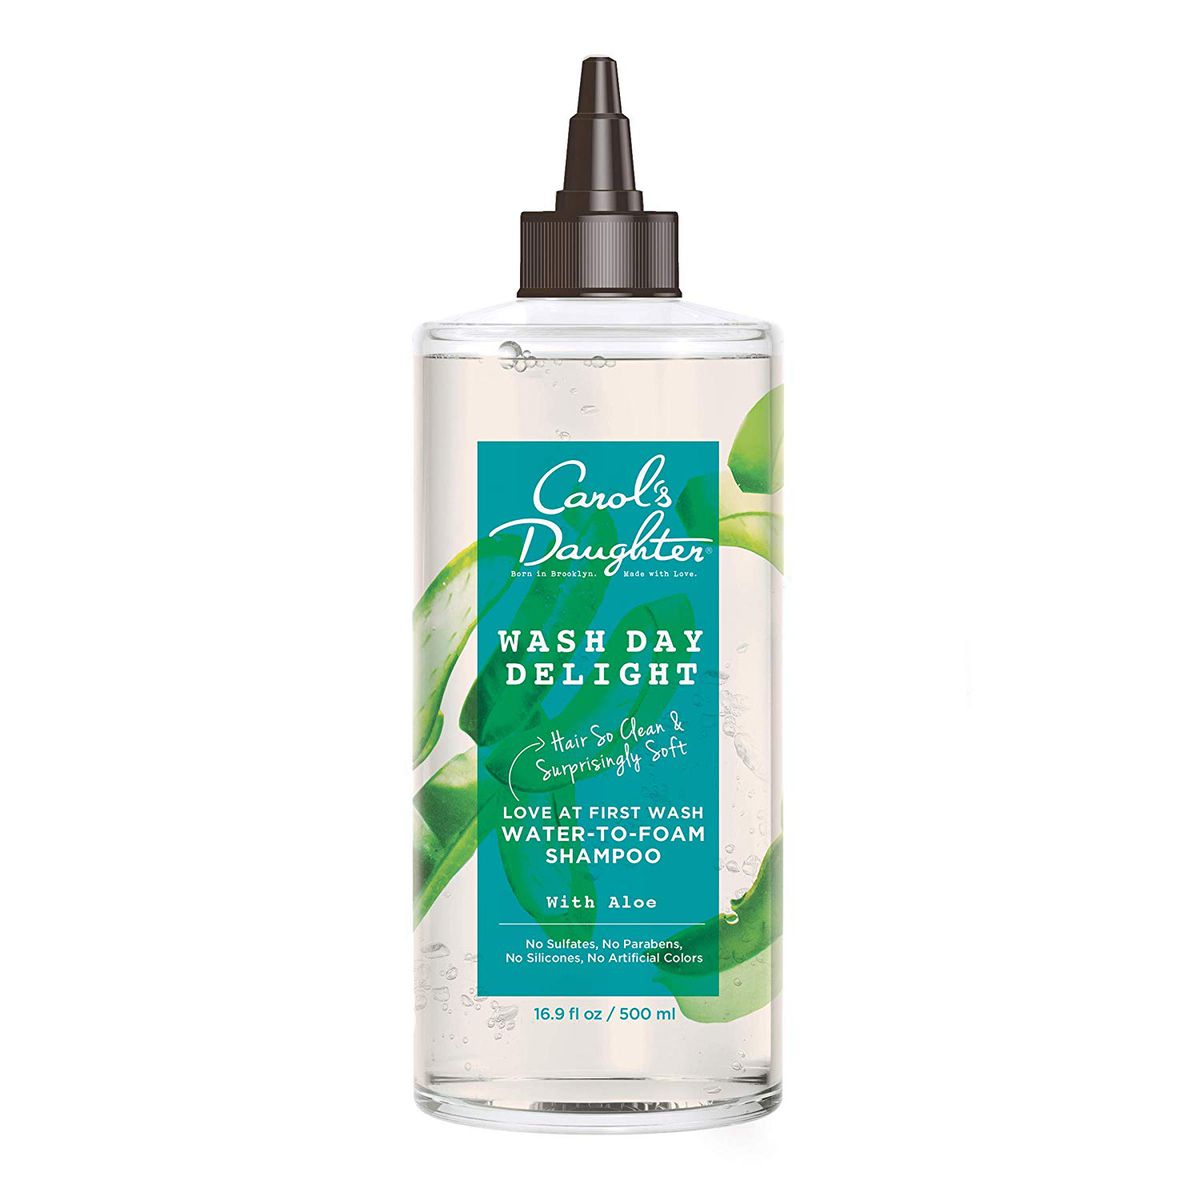 Carol's Daughter Wash Day Delight Review